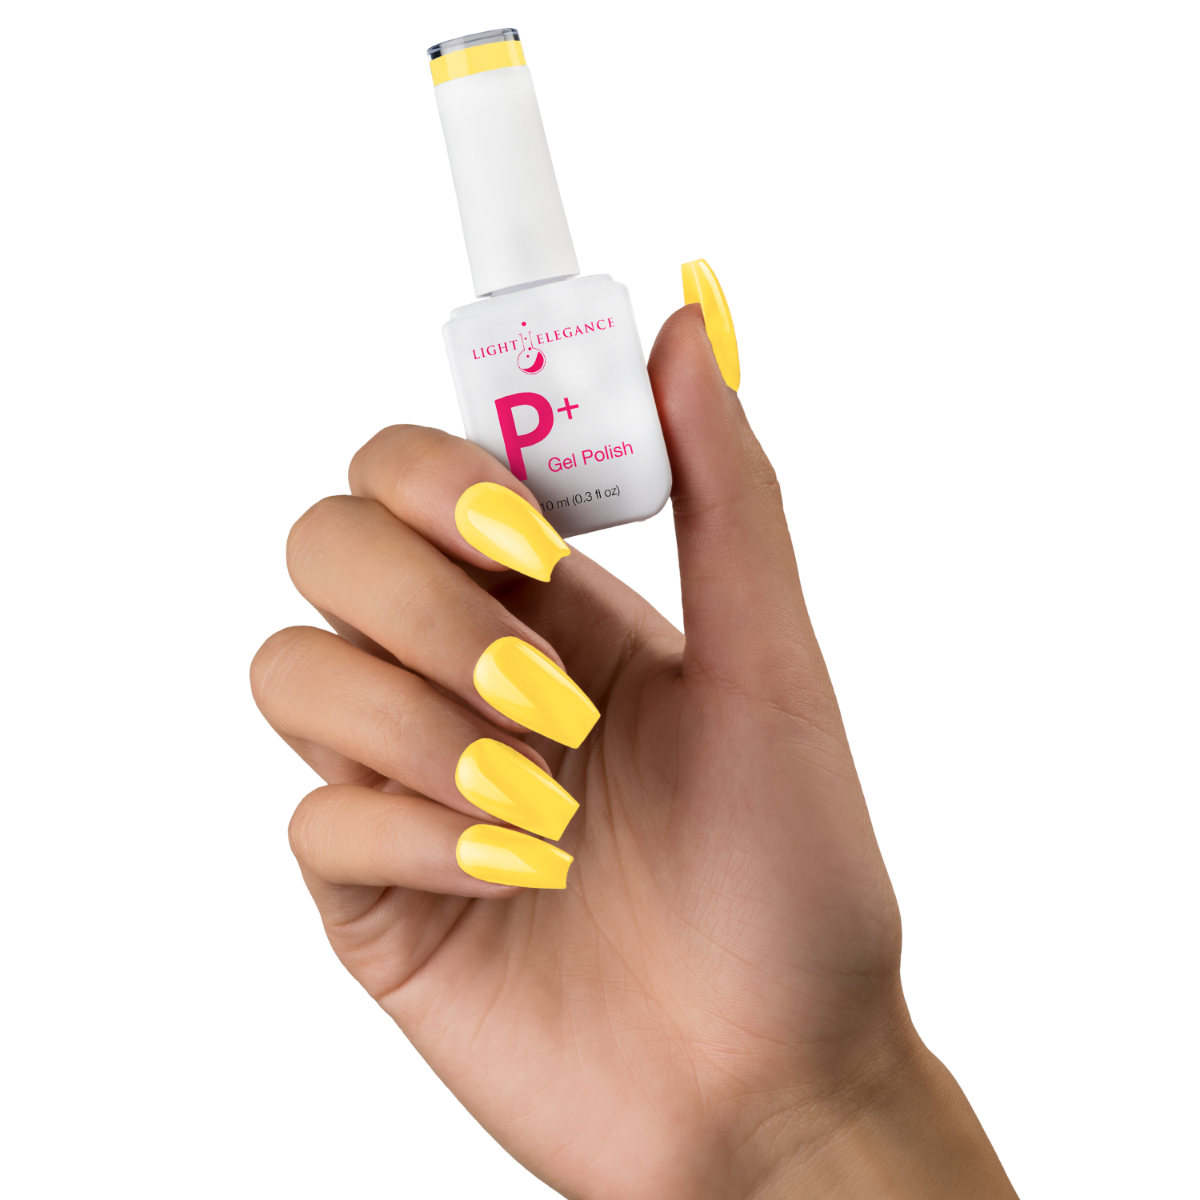 Light Elegance P+ Soak Off Color Gel - Yellowjacket :: New Packaging - Creata Beauty - Professional Beauty Products